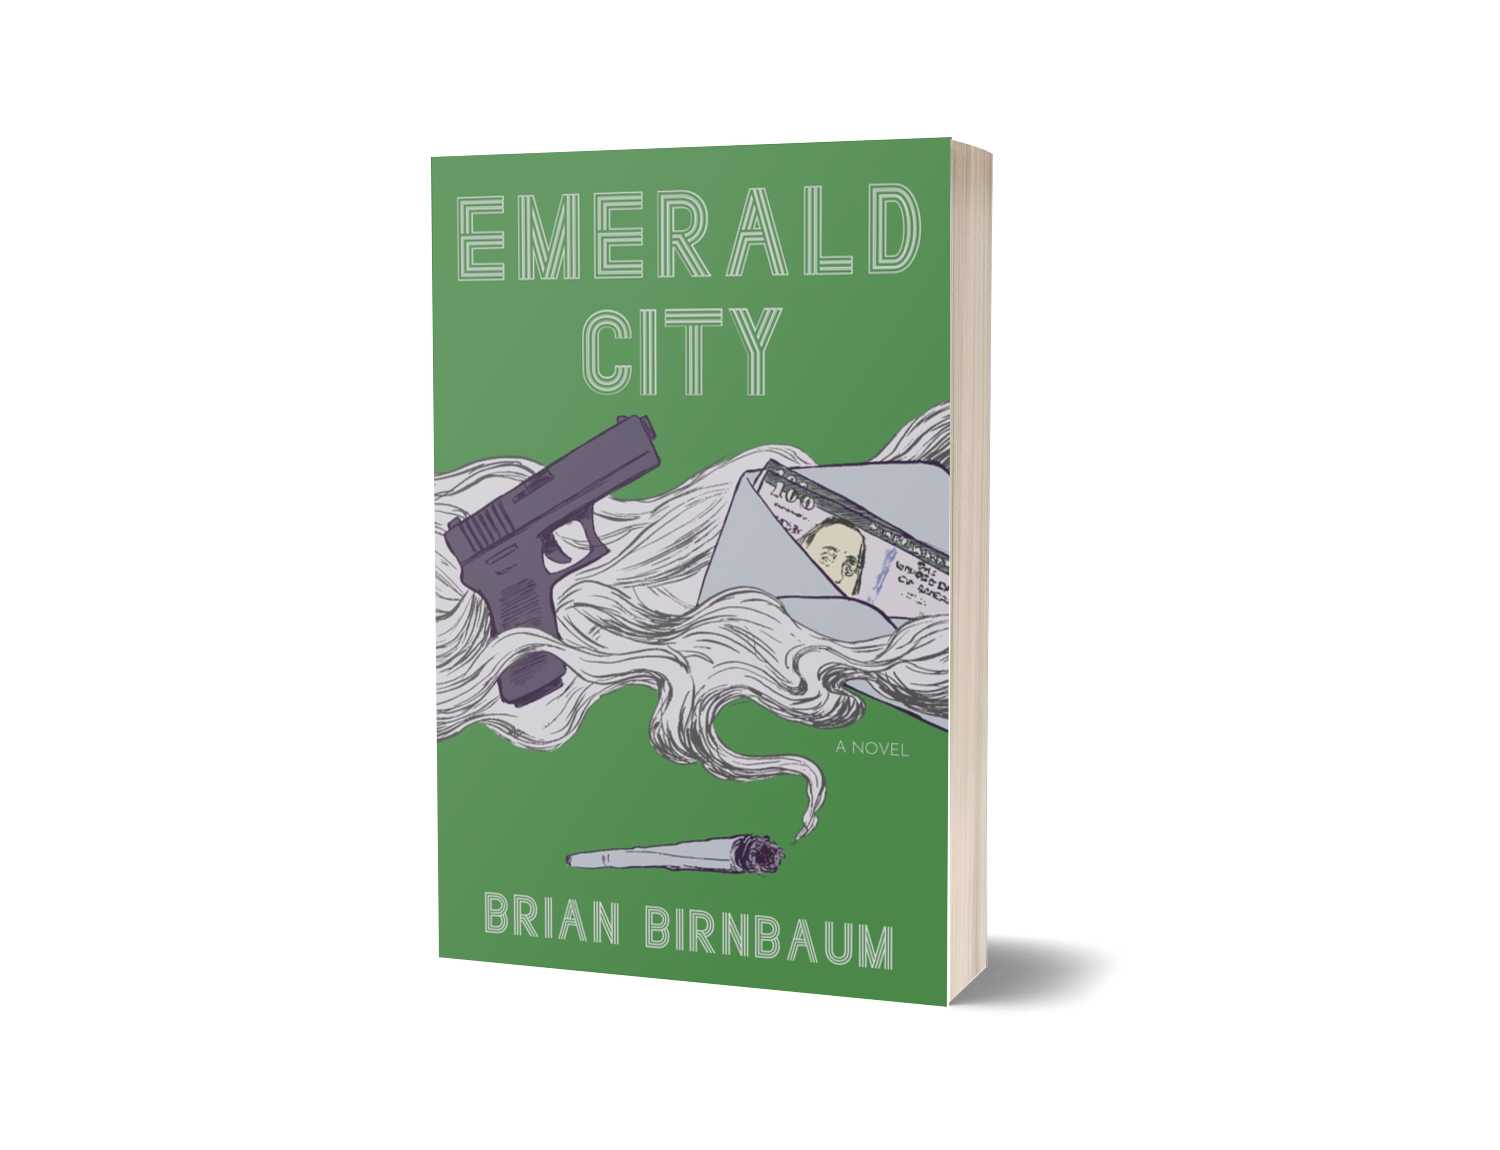 Cover of "Emerald City"